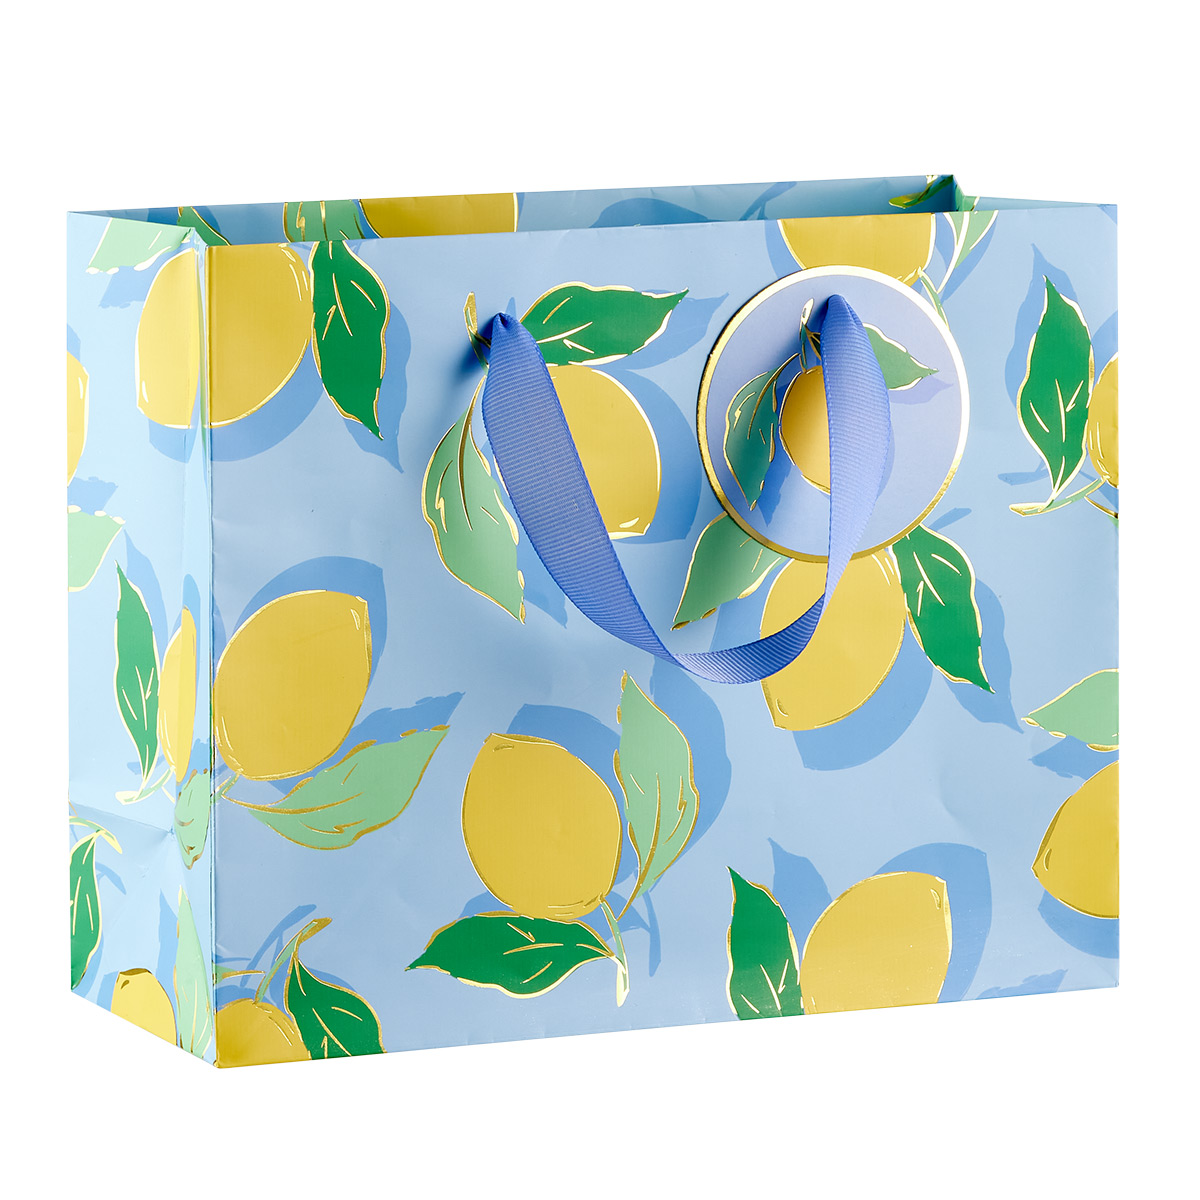 https://www.containerstore.com/catalogimages/474896/10091595-gift-tote-lemons.jpg